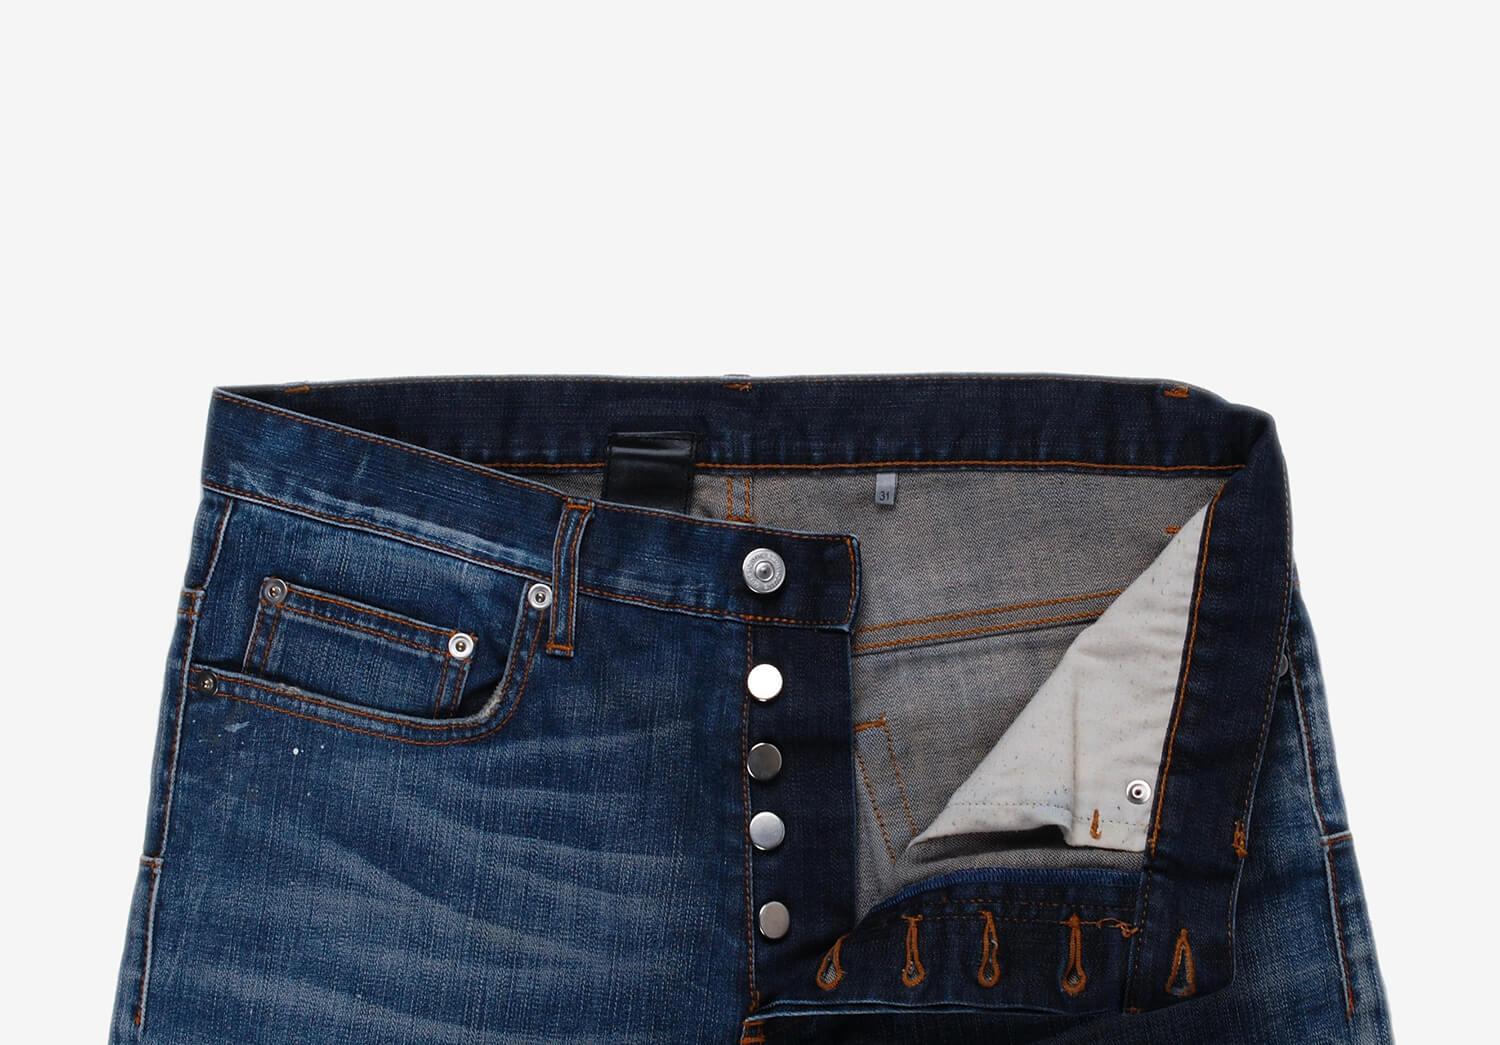 Item for sale is 100% genuine Dior Homme “Under my Car” jeans by Hedi
Color: Blue
(An actual color may a bit vary due to individual computer screen interpretation)
Material: 98% cotton, 2% elastan
Tag size: 31
These jeans are great quality item.